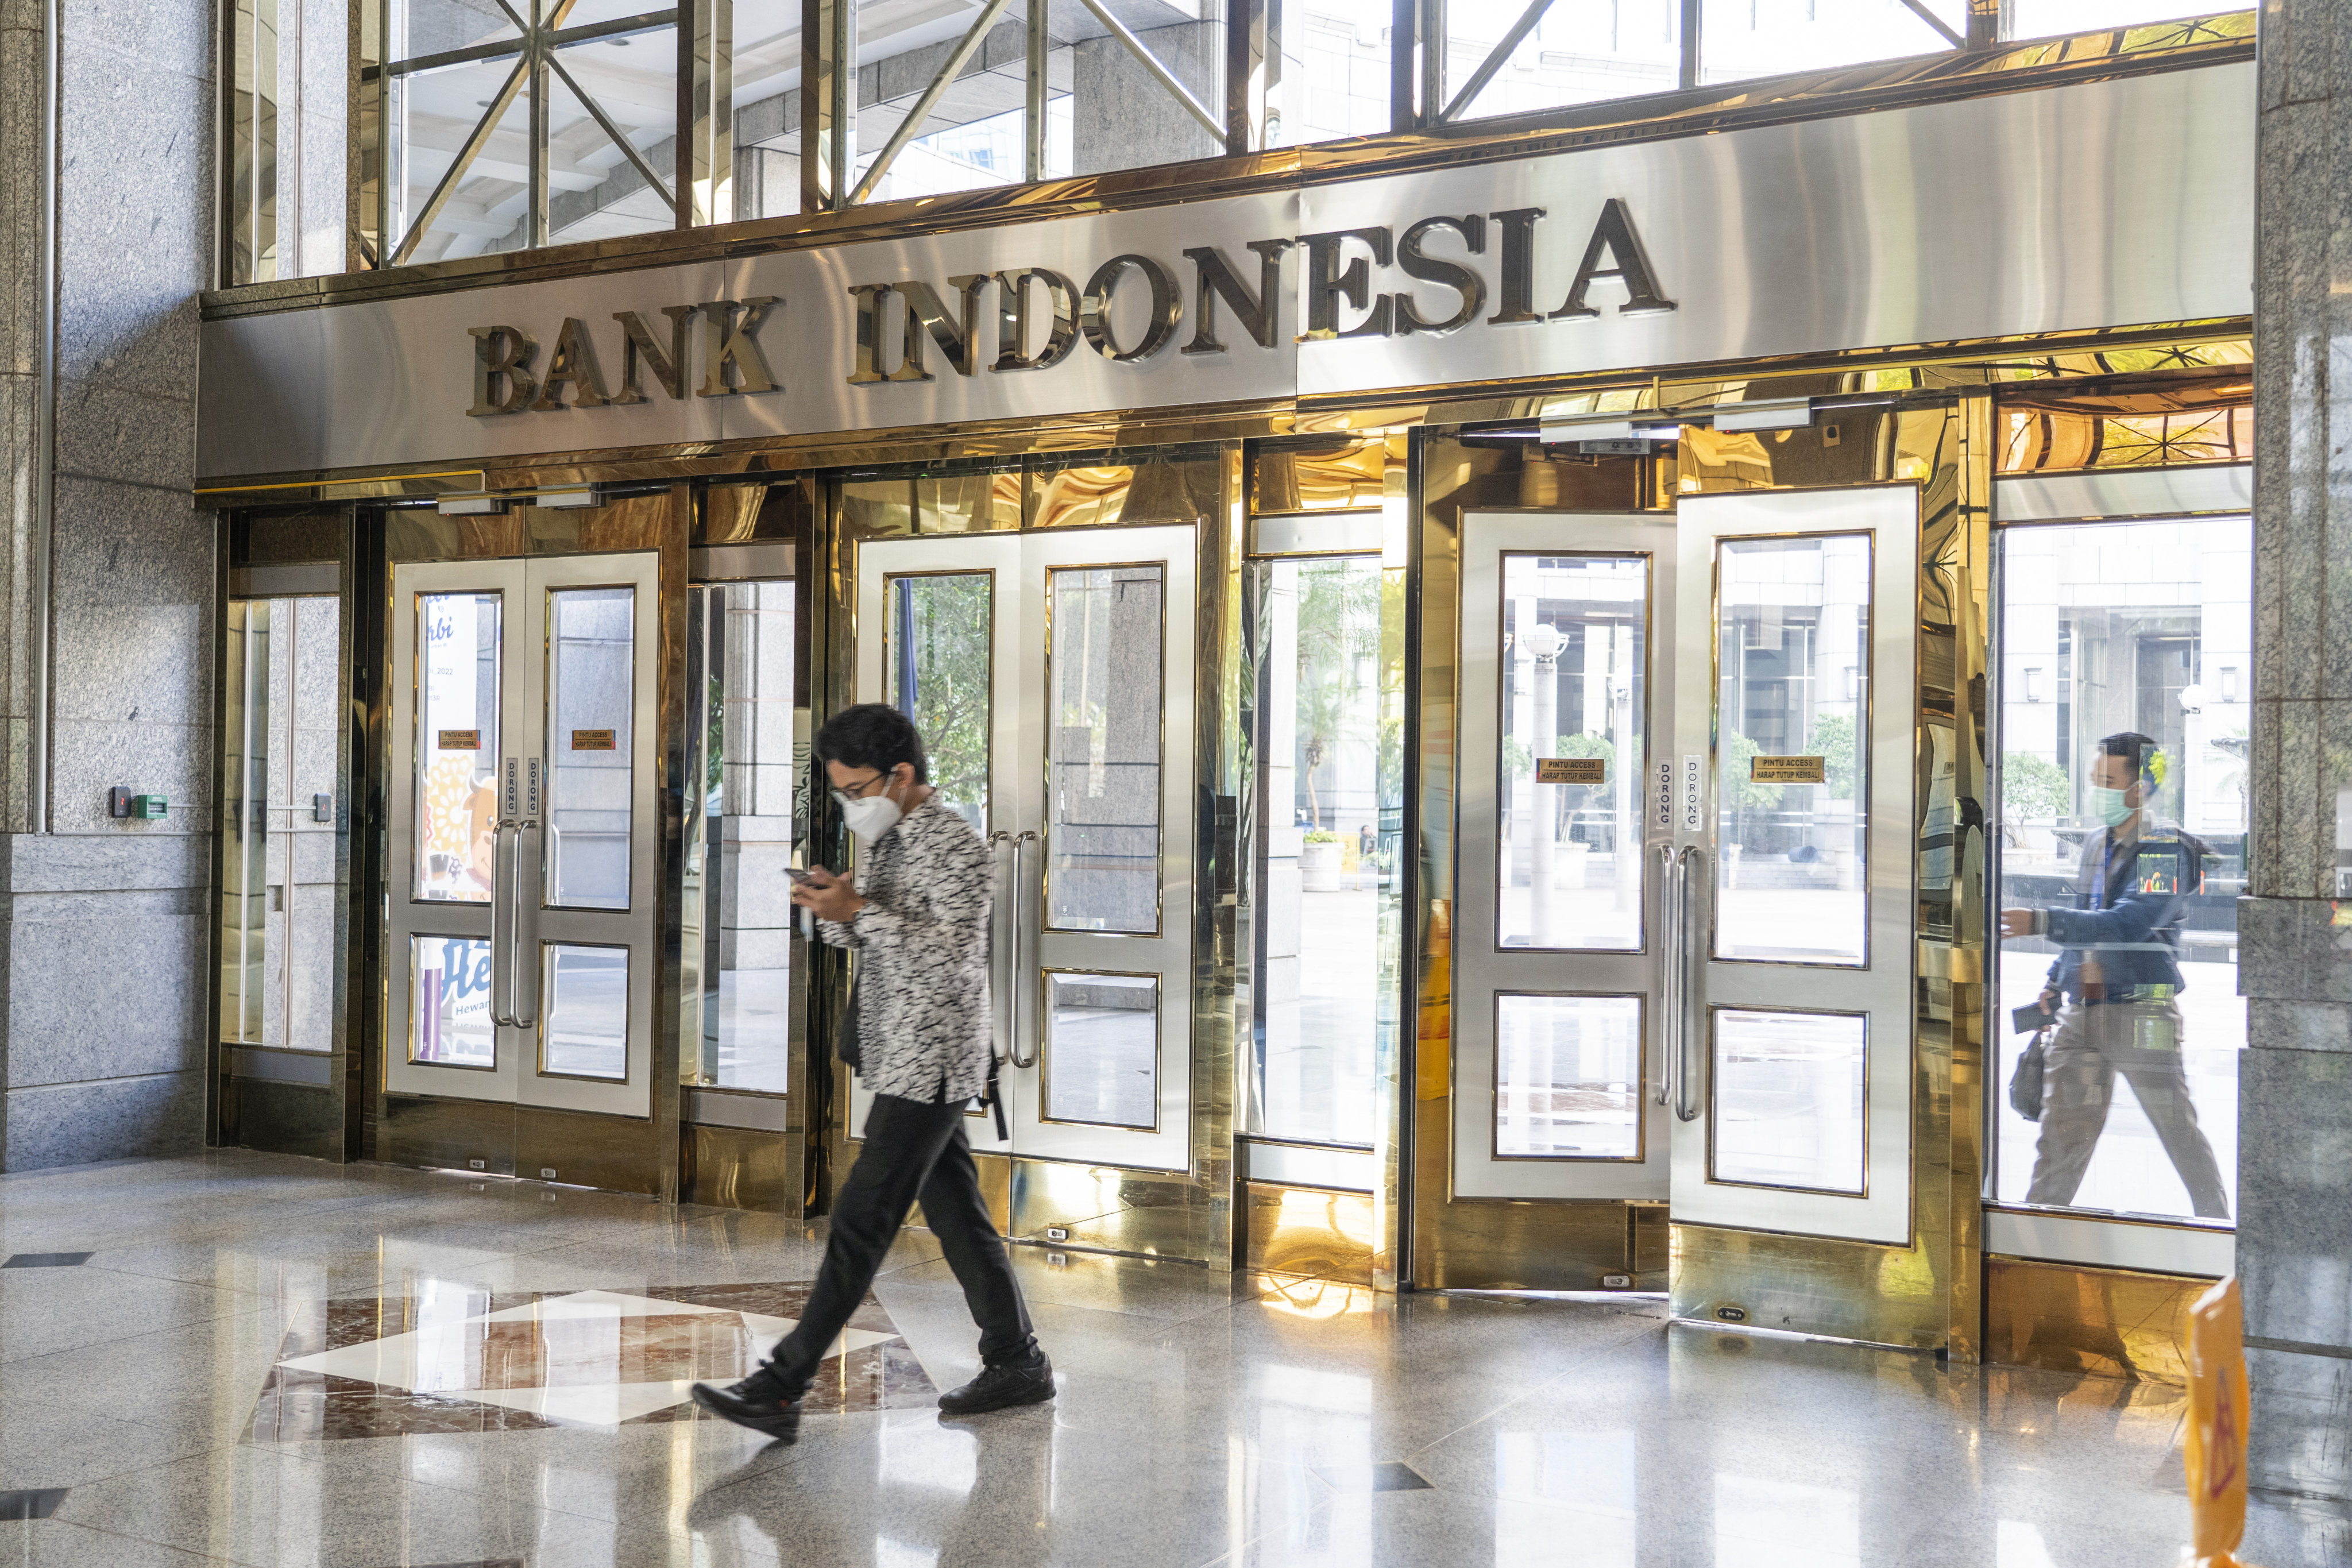 A man walks through the lobby of the Bank Indonesia headquarters in Jakarta on June 21. The country was one of the economies badly affected by the 2013 “taper tantrum”, but today Indonesia’s central bank says rising inflation is manageable. Photo: Bloomberg